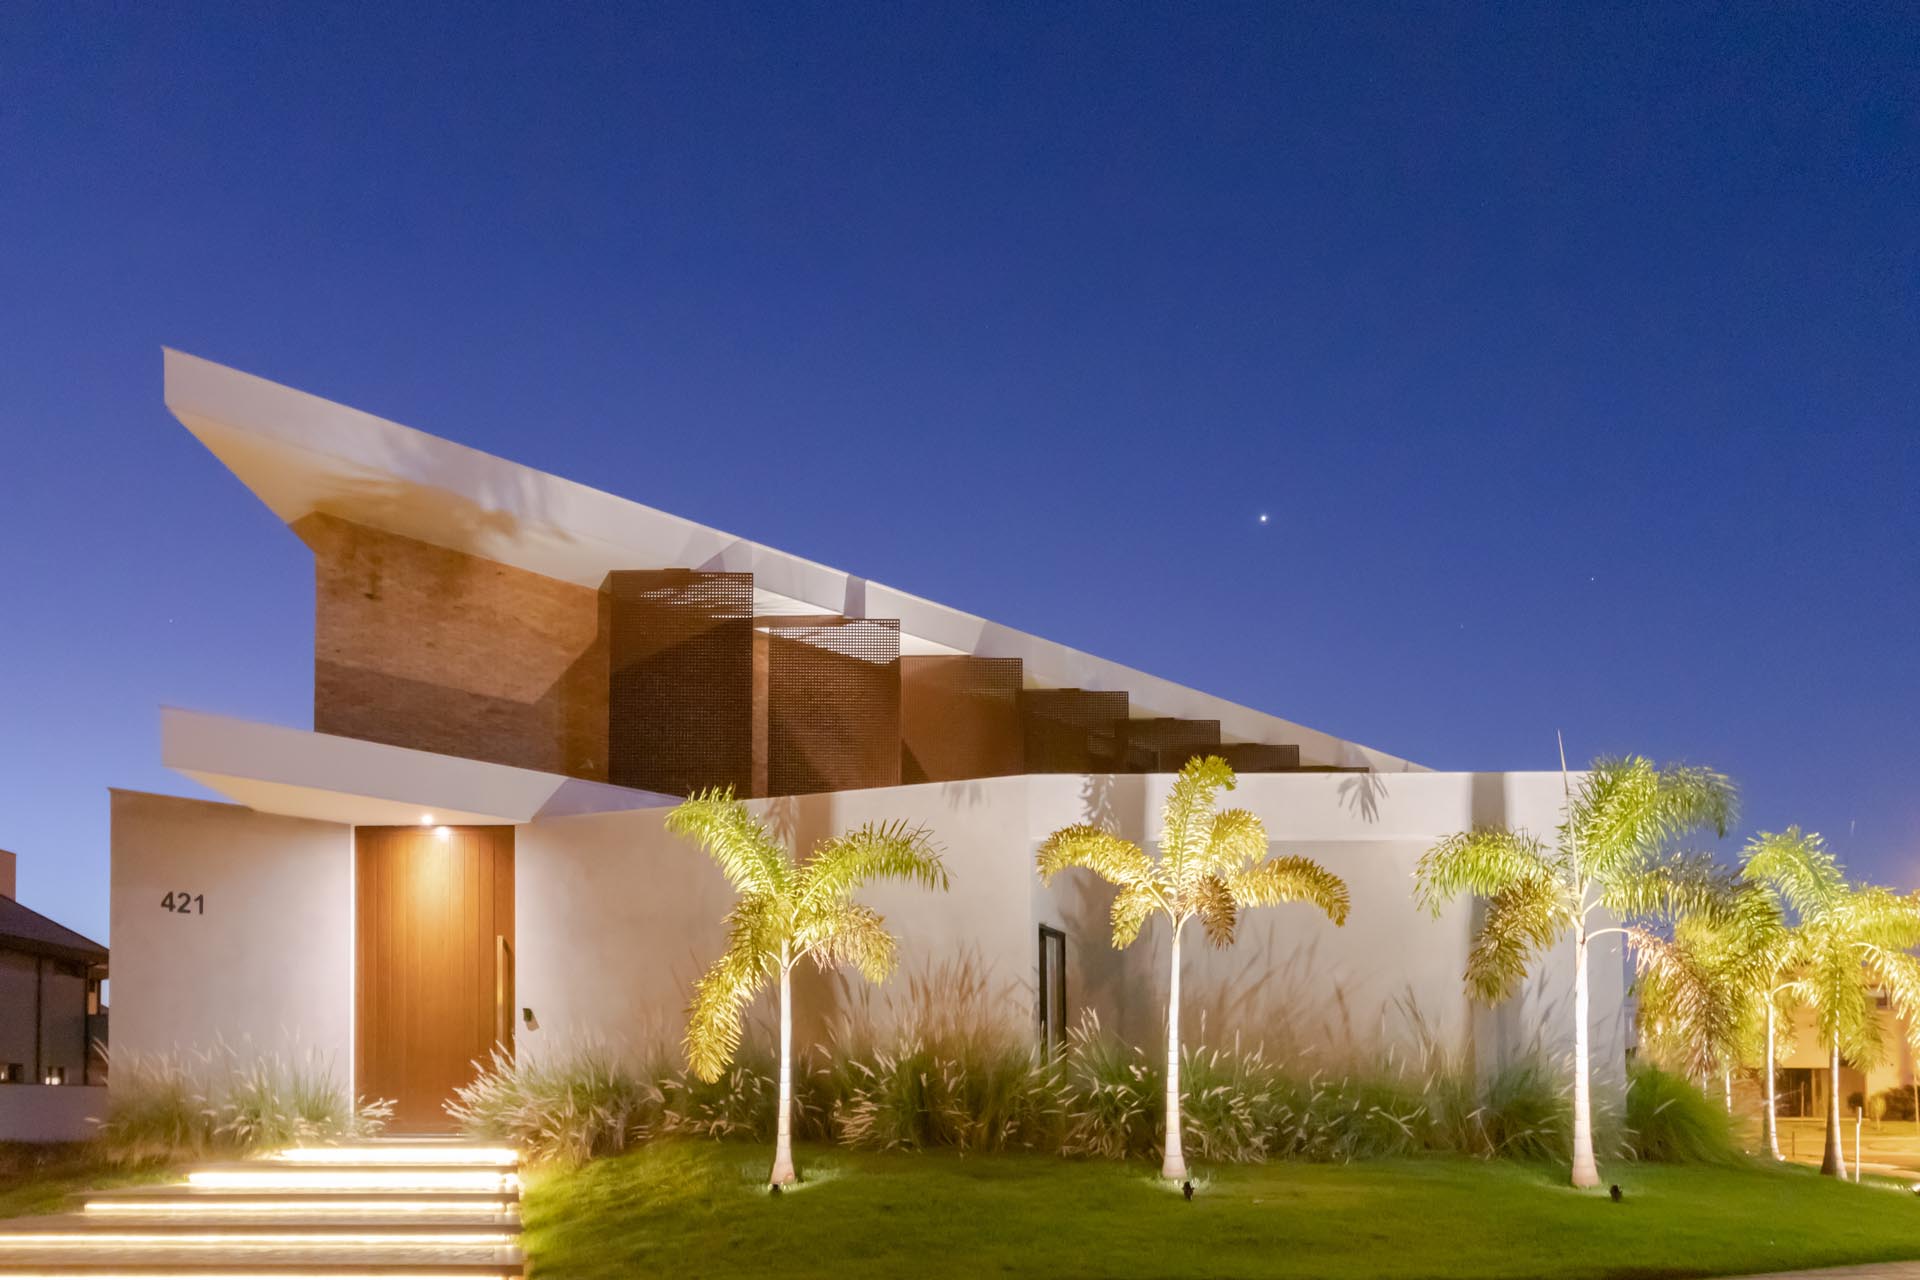 This modern home is located on an irregular corner lot, with the curb appeal showcasing steps with hidden lighting, and uplighting the palm trees.